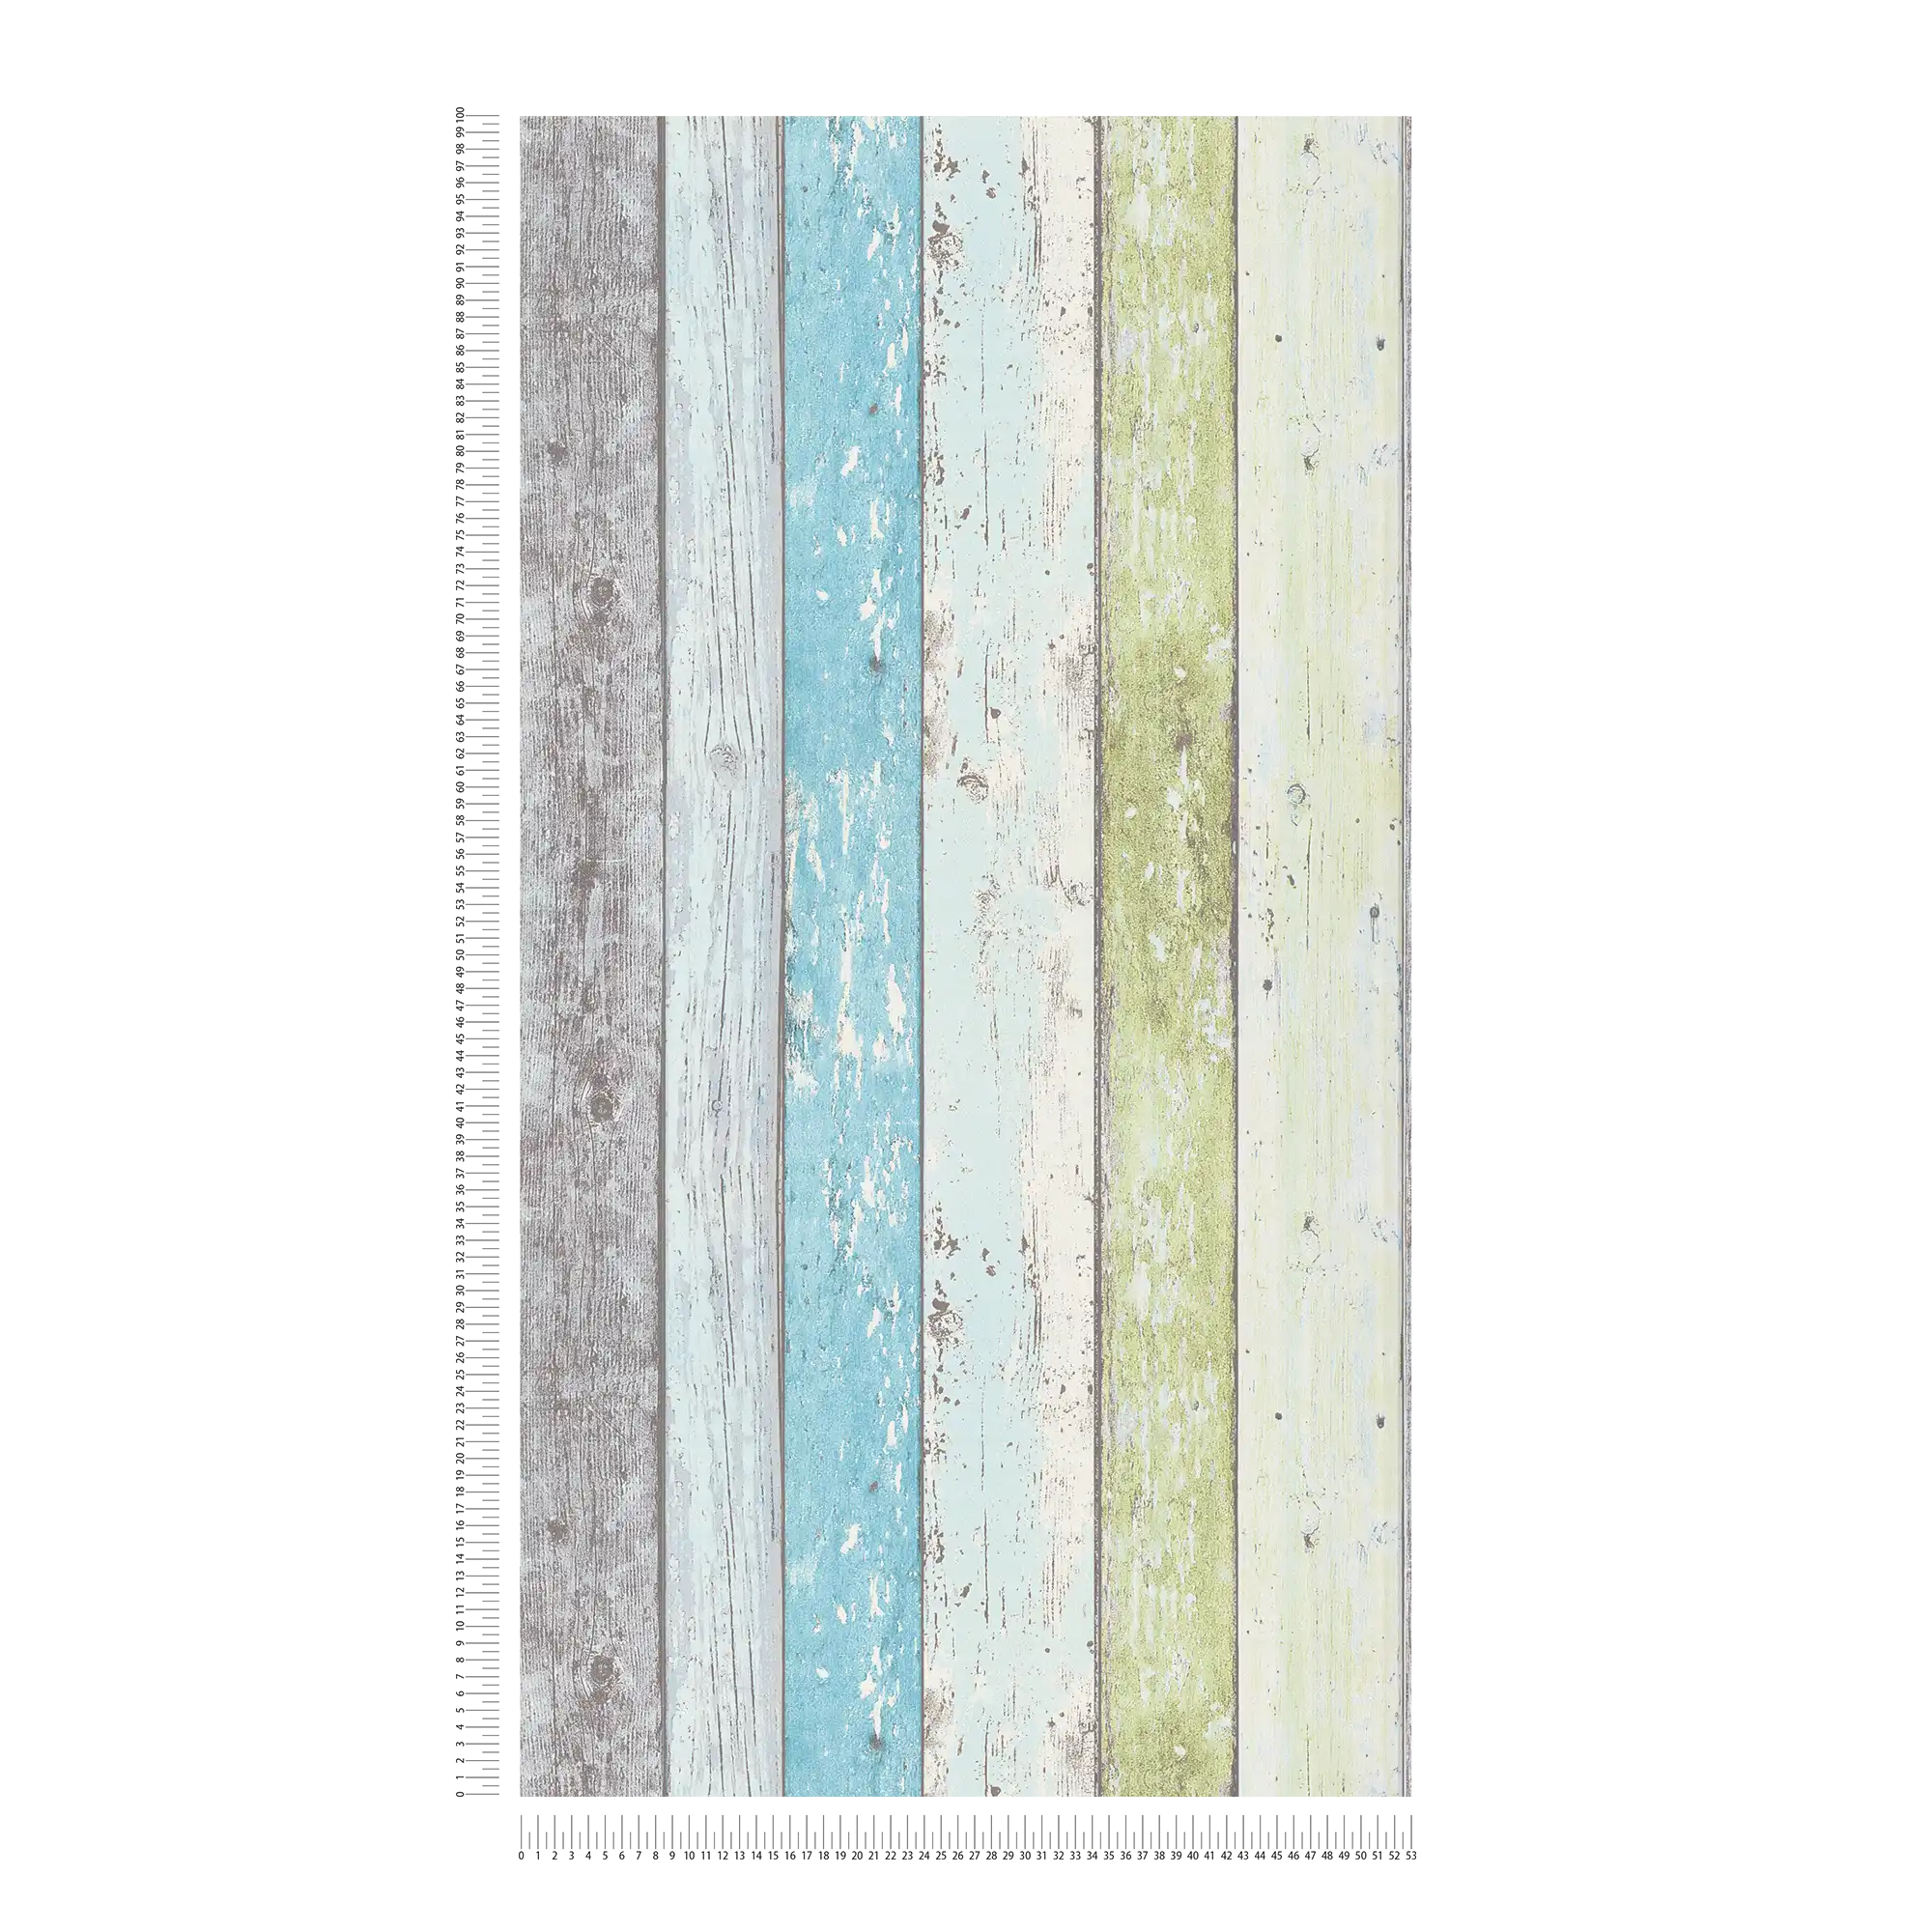             Wood wallpaper with used look for vintage & country style - blue, green, white
        